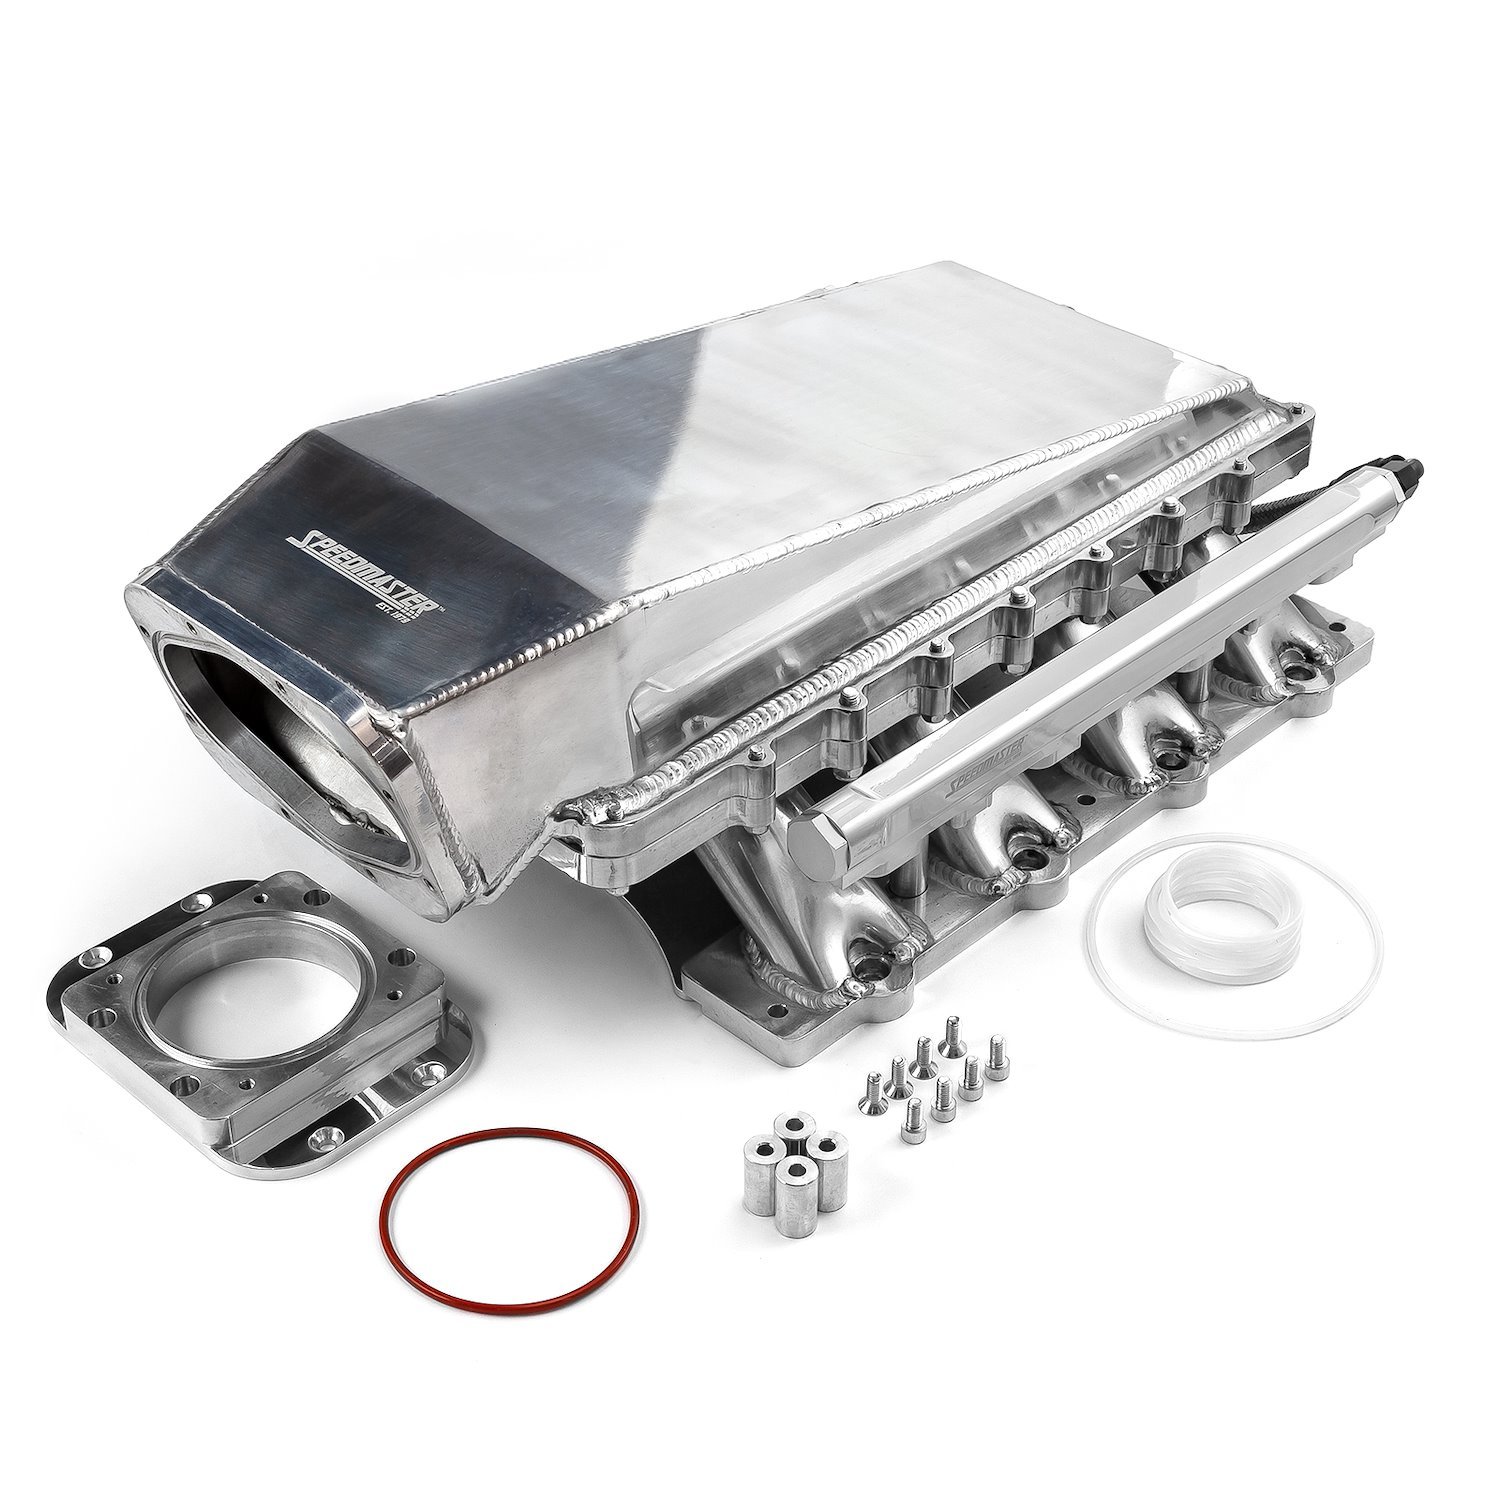 2-Piece Modular Low-Ram Air Intake Manifold Ford 5.0L Coyote, 98 mm Throttle Body Bore [Polished Finish]